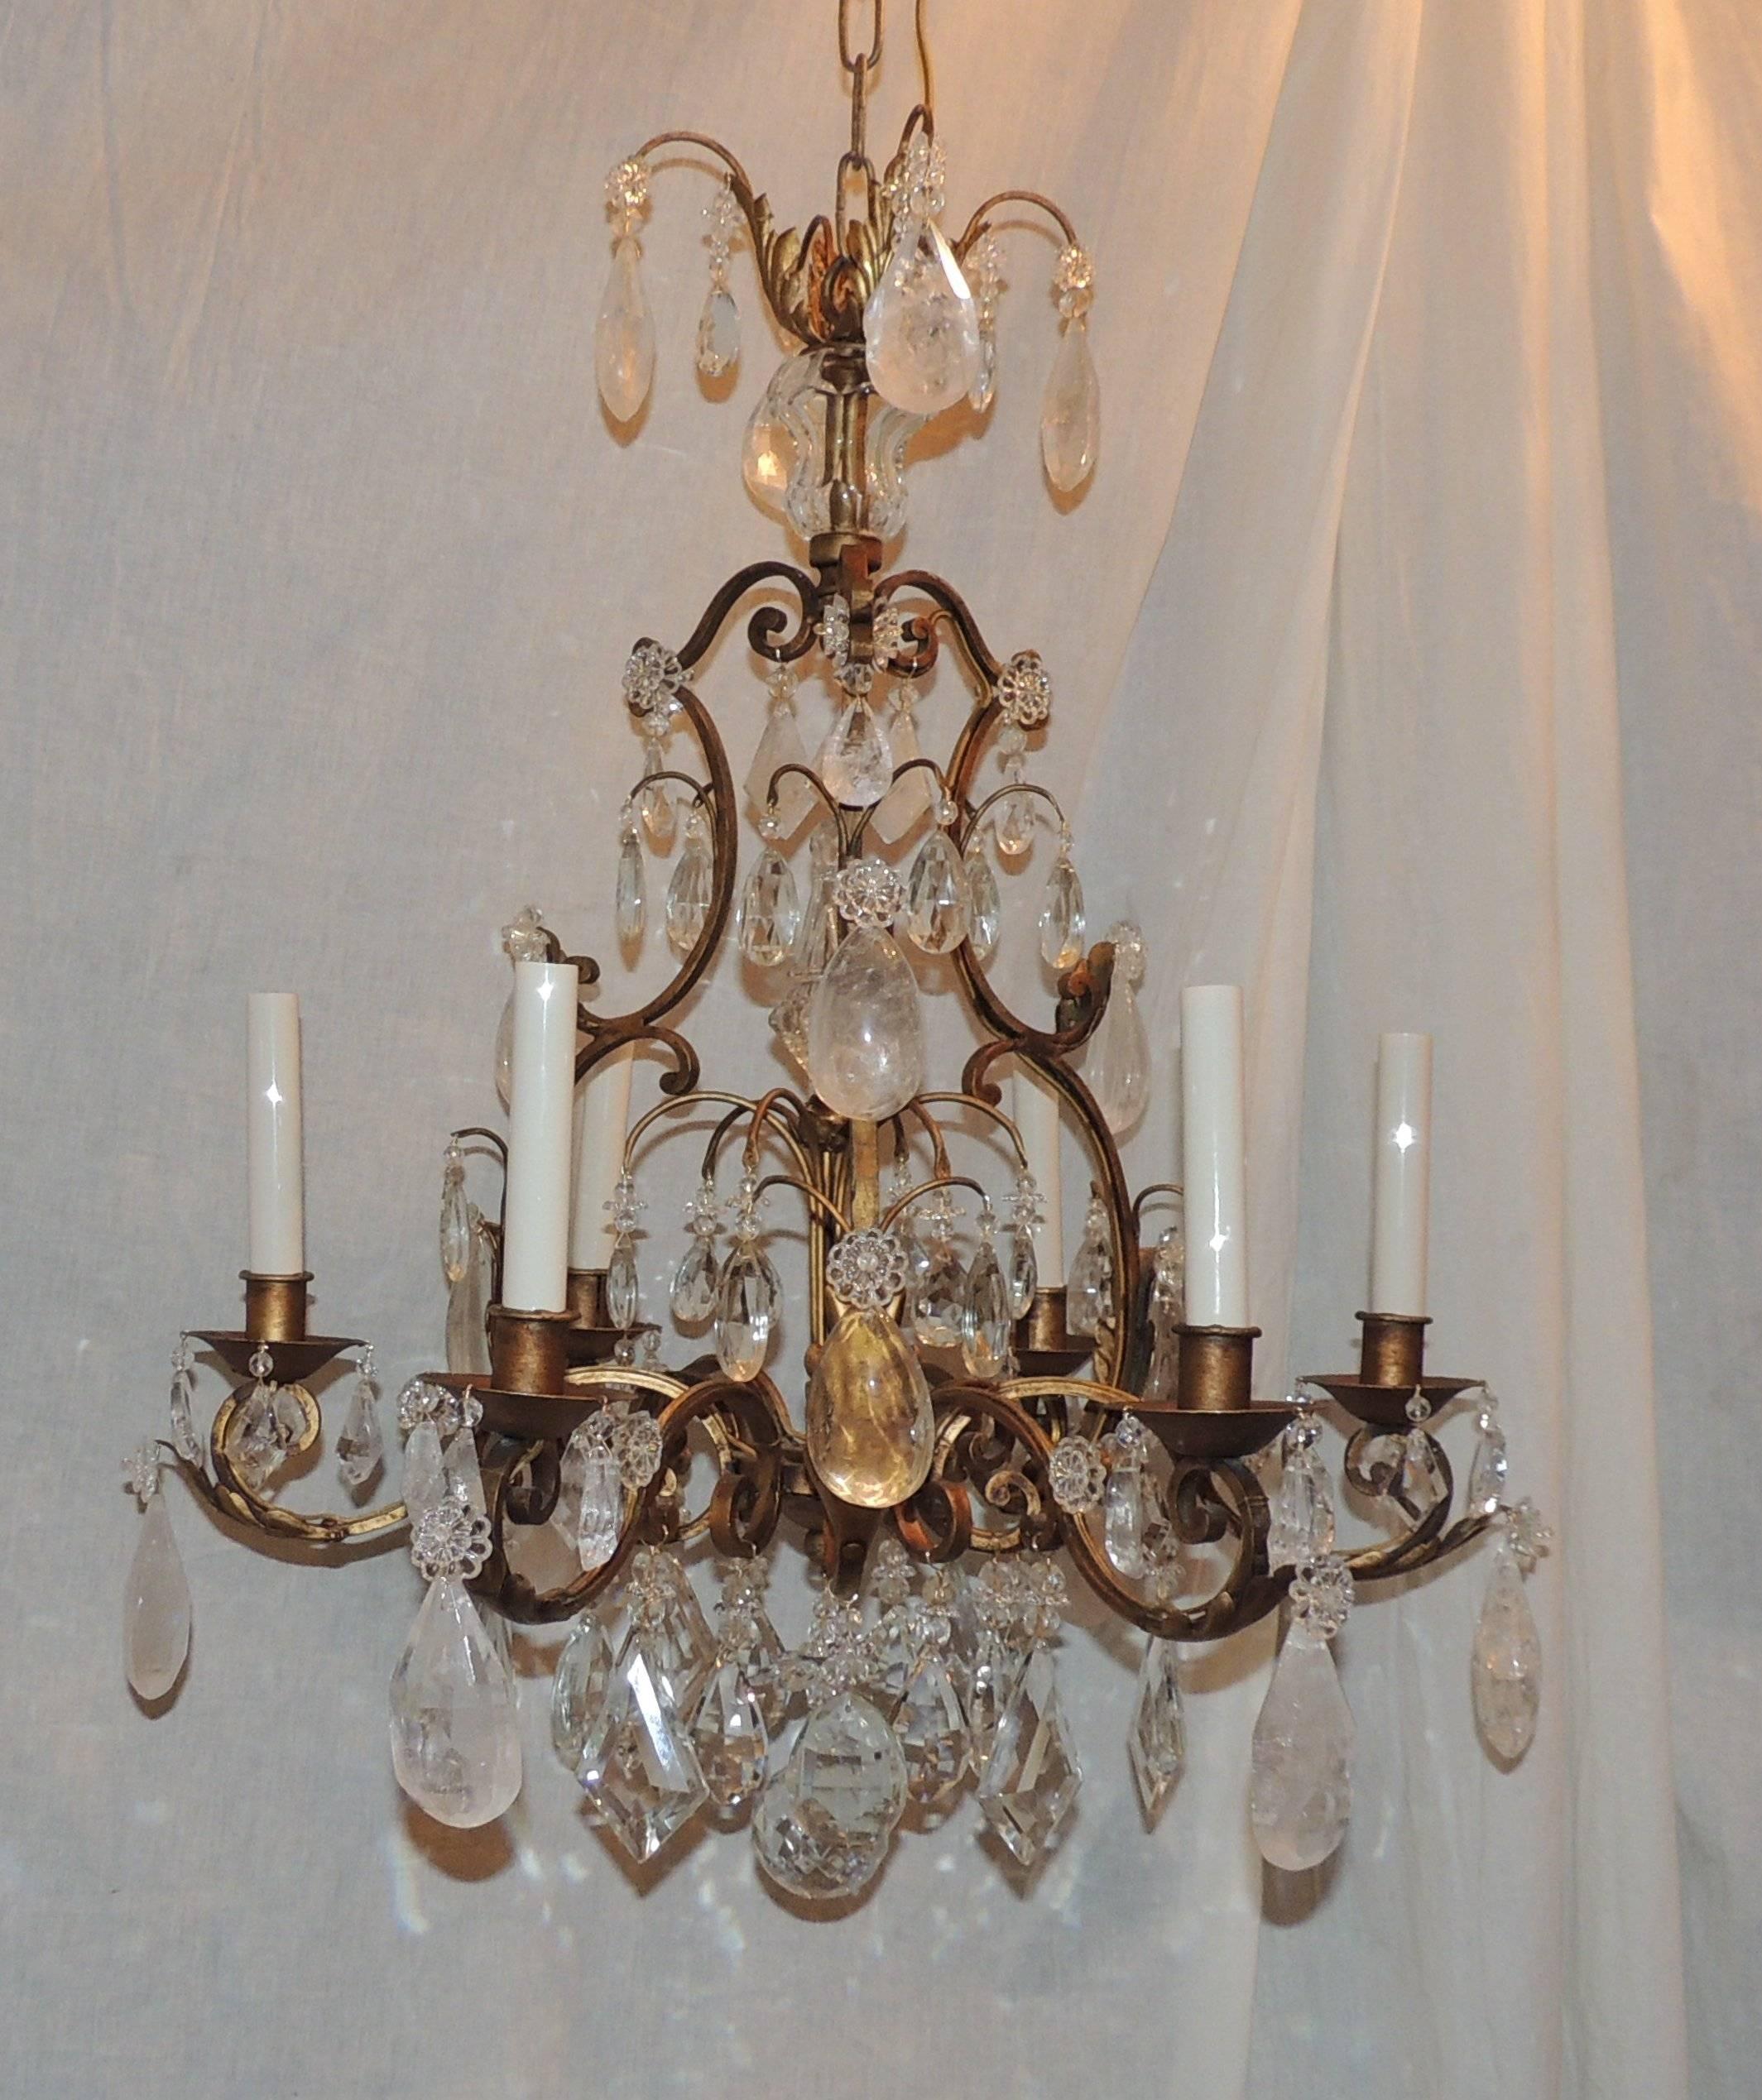 Wonderful soft scrolls accent the body of this six-arm Baguès rock crystal chandelier with center finial and lovely layers of prism and clear crystal accented by the rock crystal.

Measures: 22